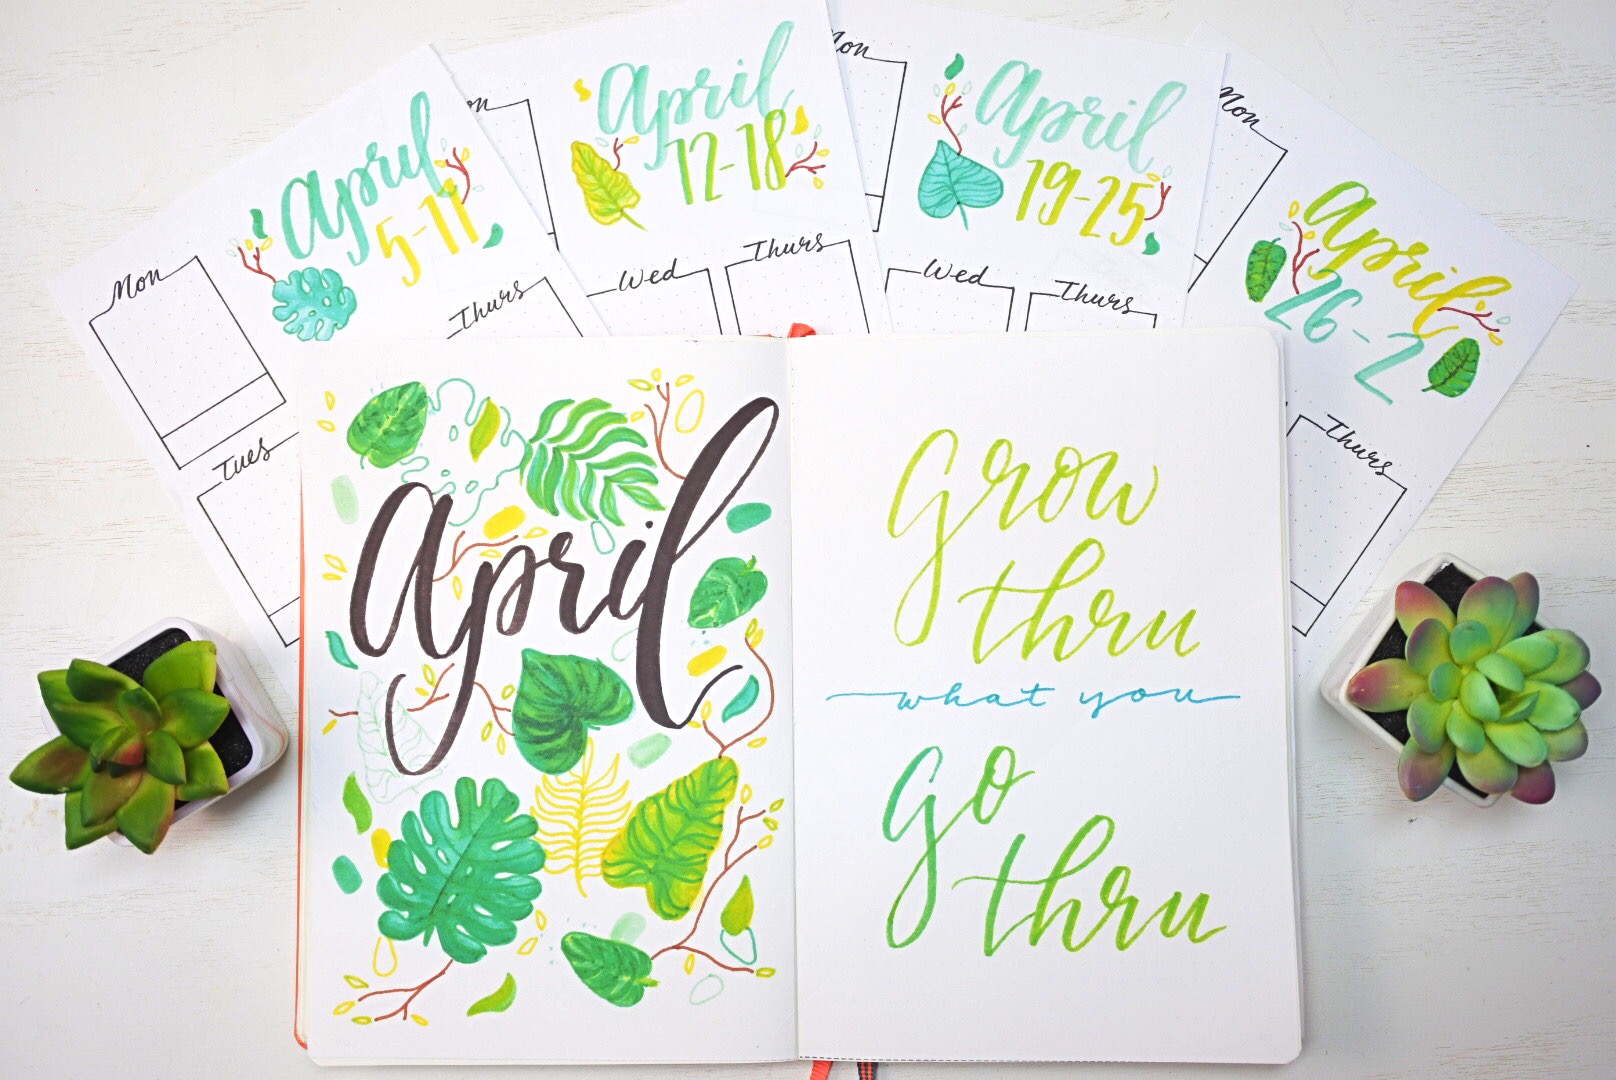 Bullet Journal Printable Templates for April 2021 ⋆ Sheena of the Journal